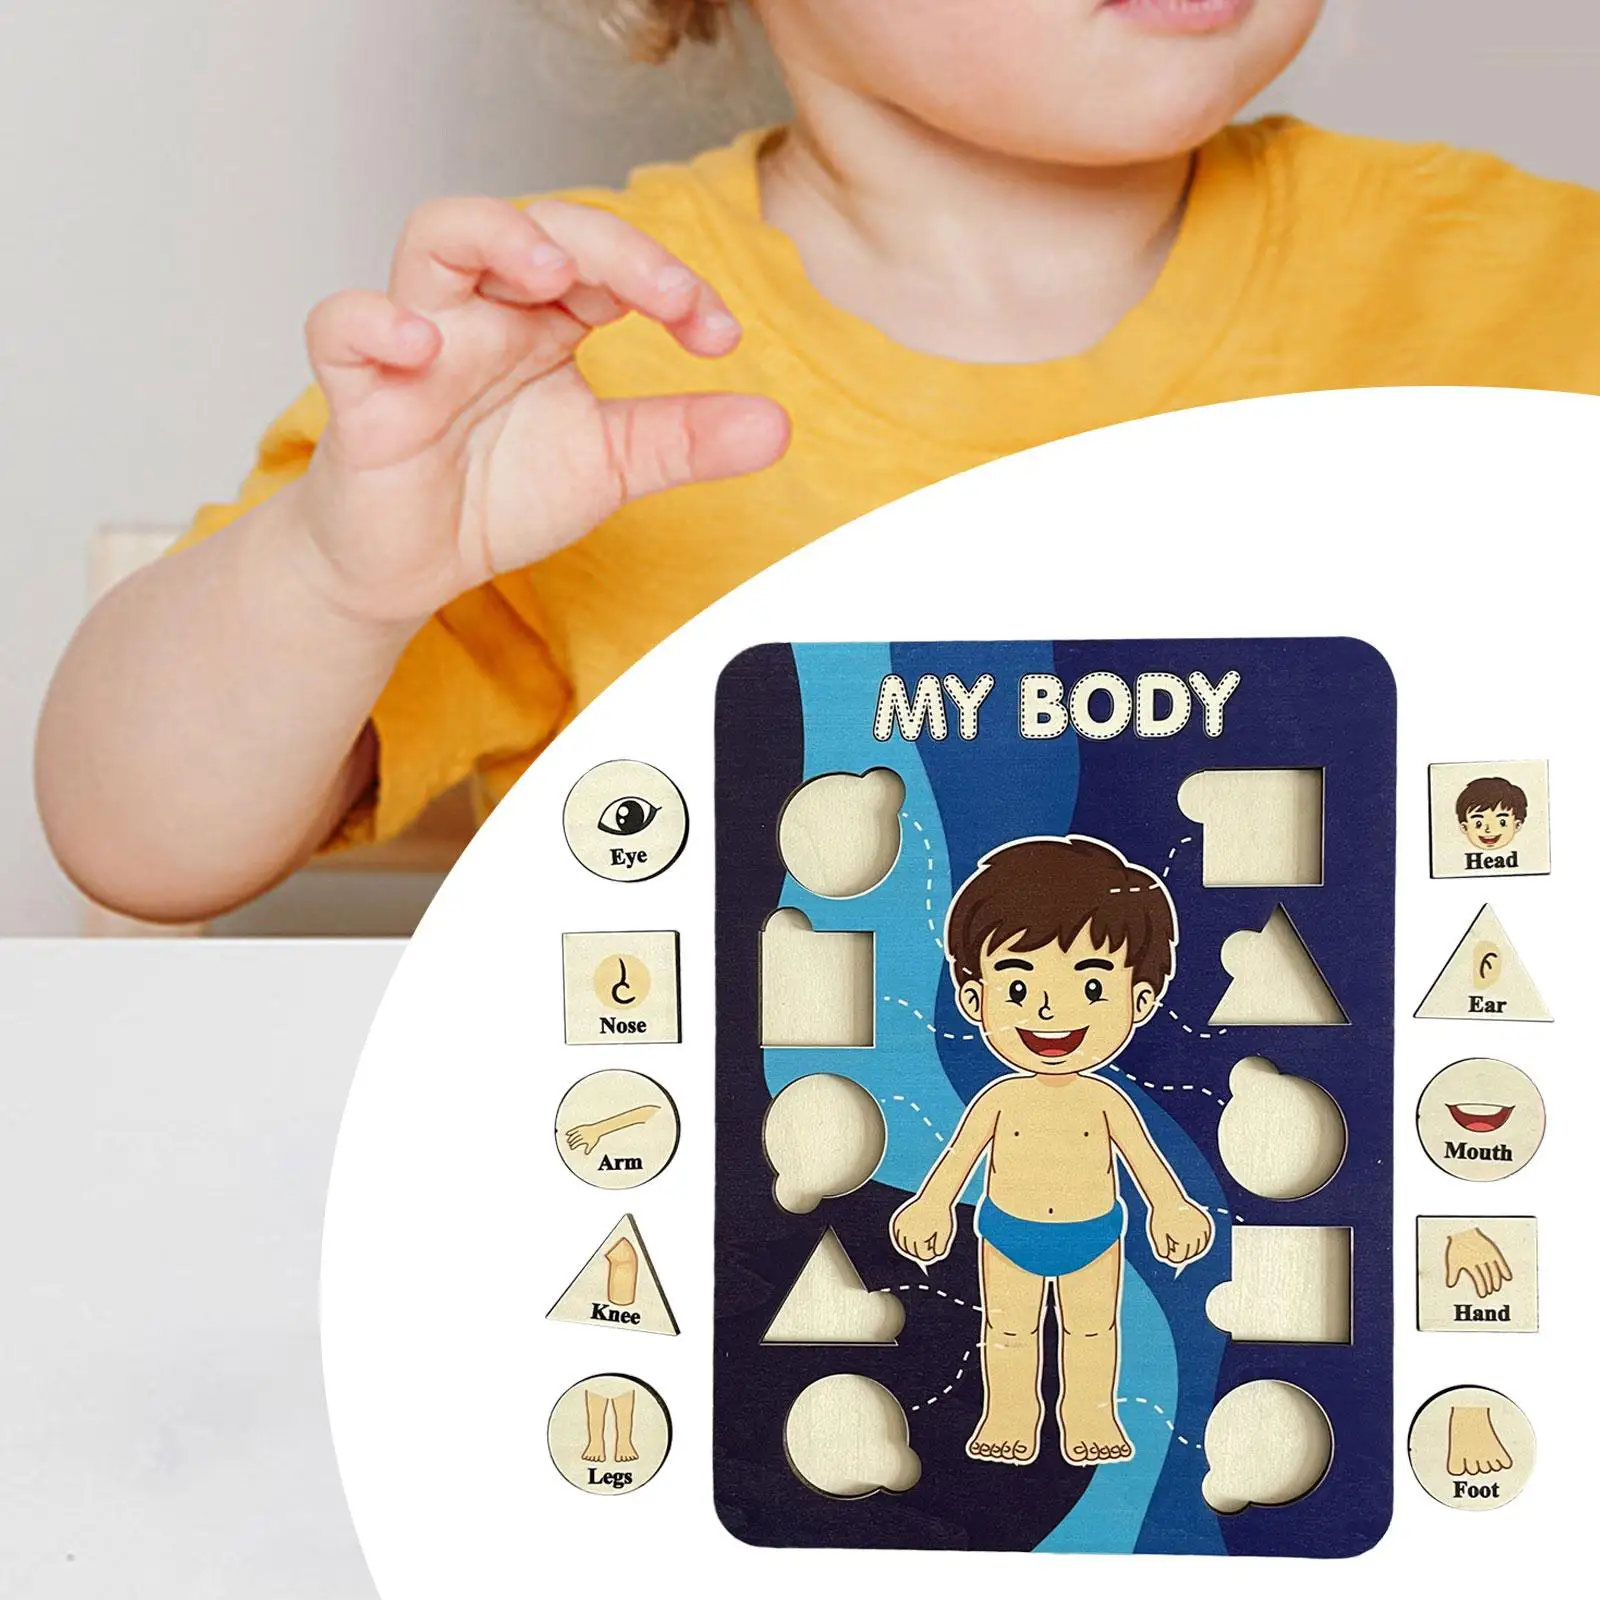 Wooden Human puzzles for Toddlers Aged 3+ for Ages 2 3 4 Year Old Kids